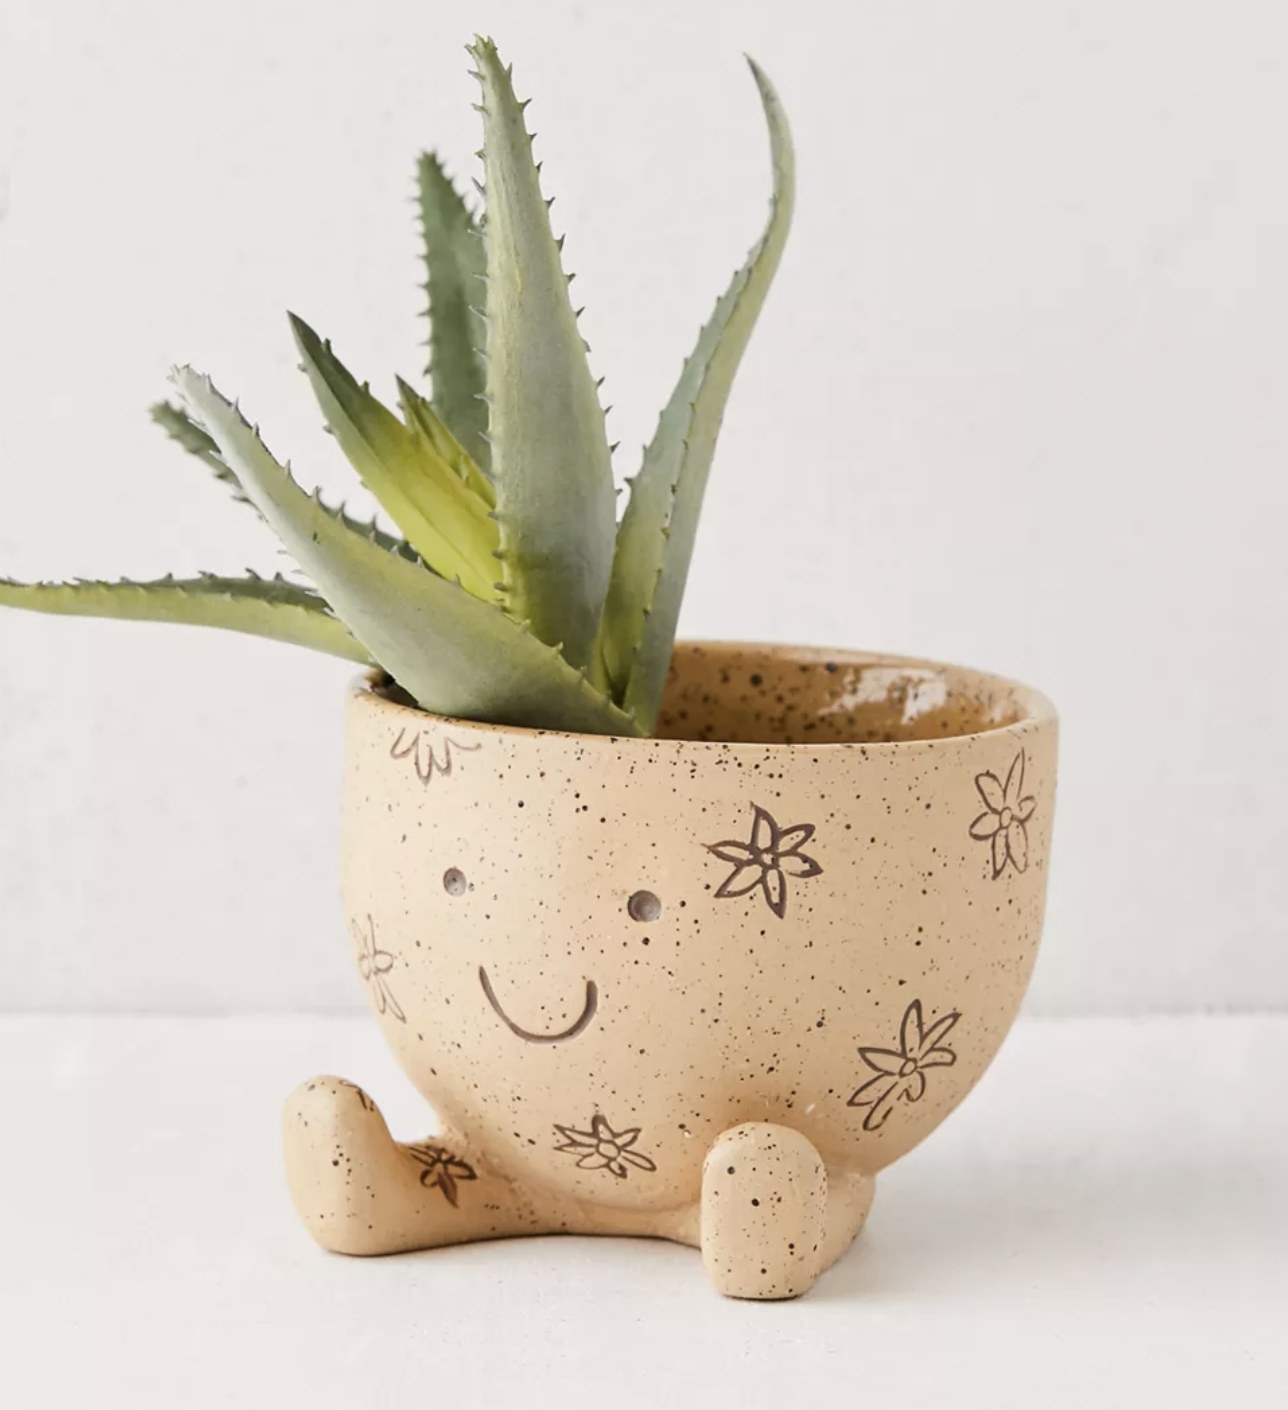 sitting planter with aloe in it